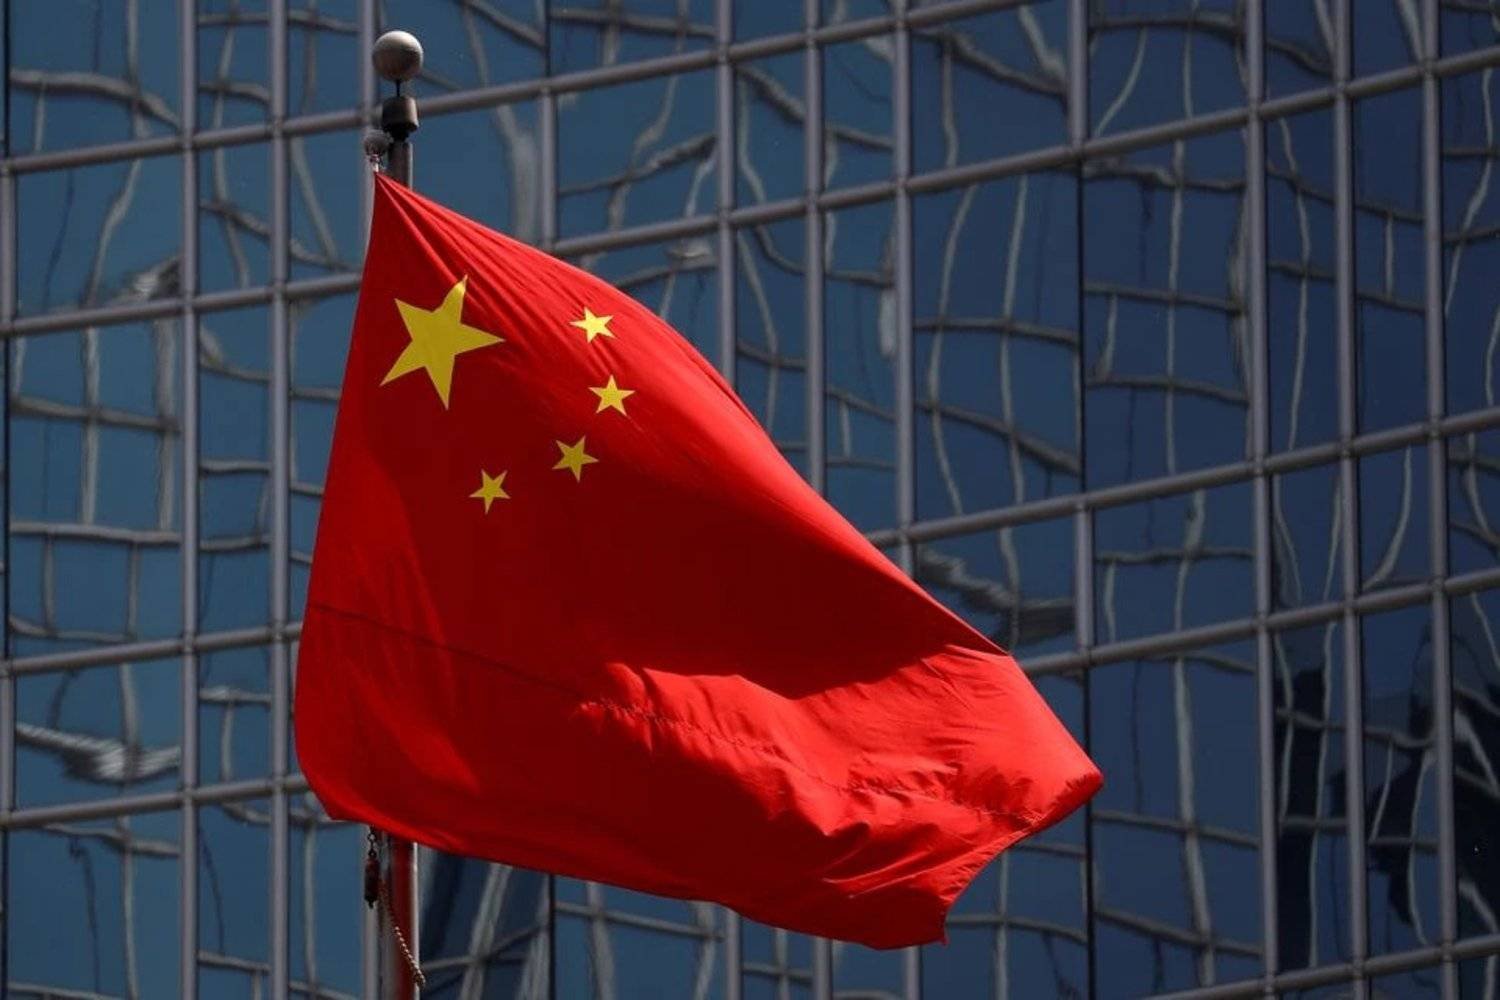 The Chinese national flag is seen in Beijing, China April 29, 2020. (Reuters)
